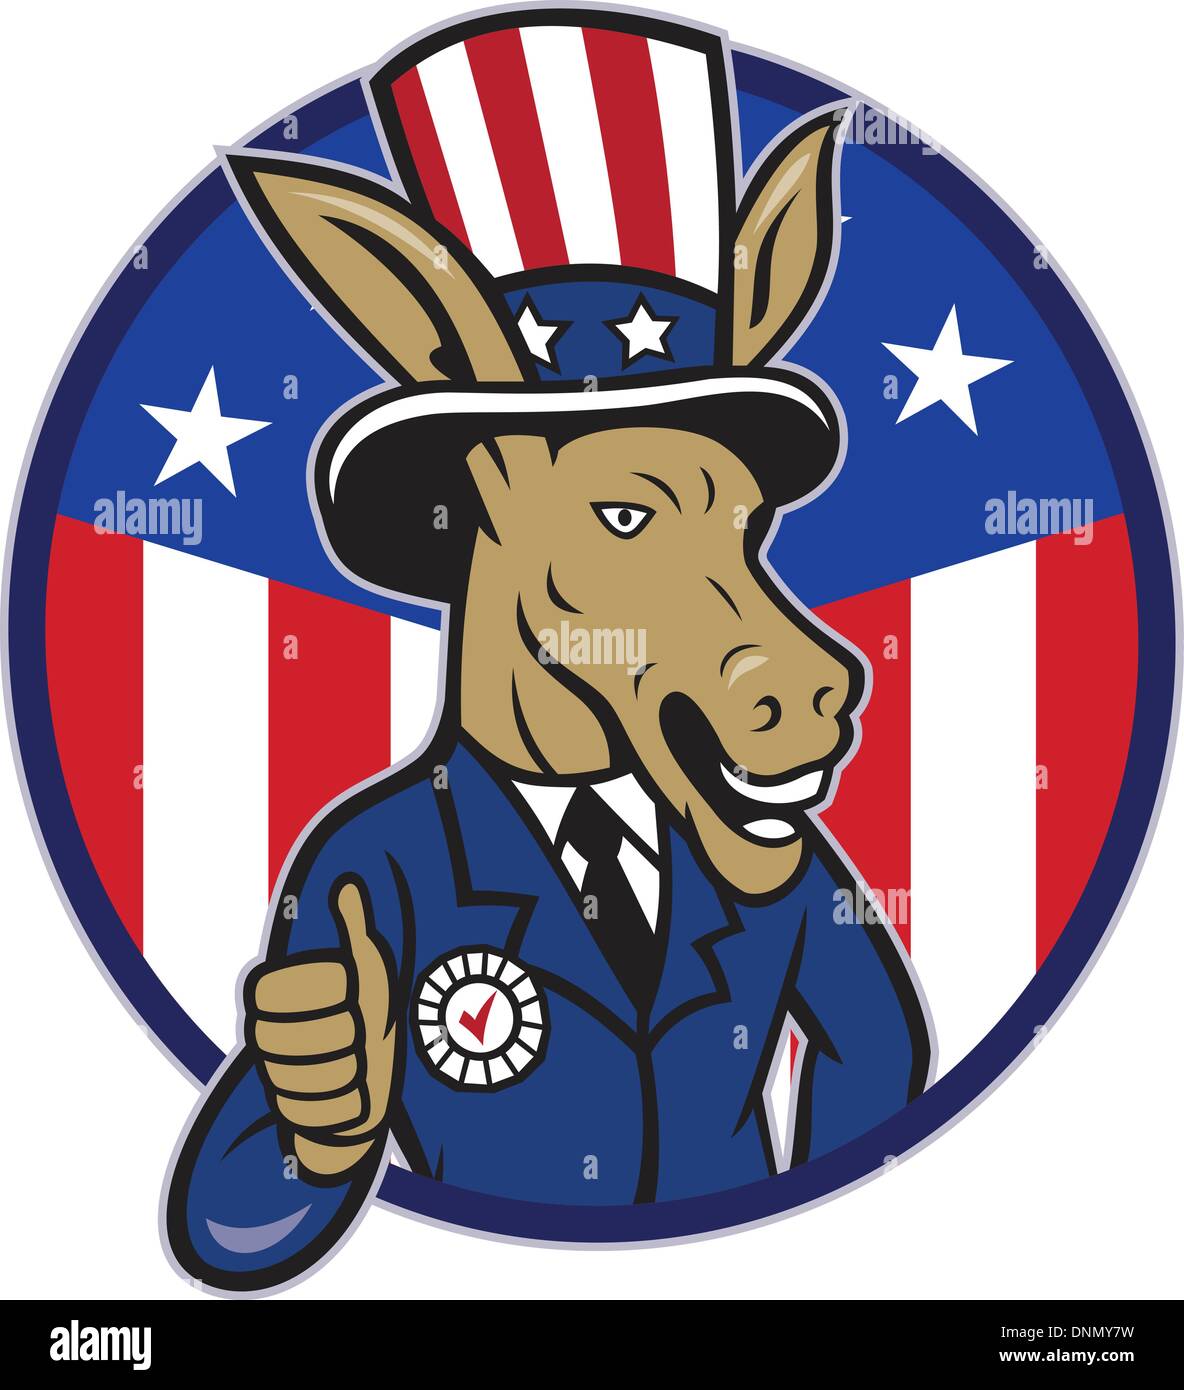 Illustration of a democrat donkey mascot of the democratic grand old party gop wearing hat and suit thumbs up set inside American stars and stripes flag circle done in cartoon style. Stock Vector